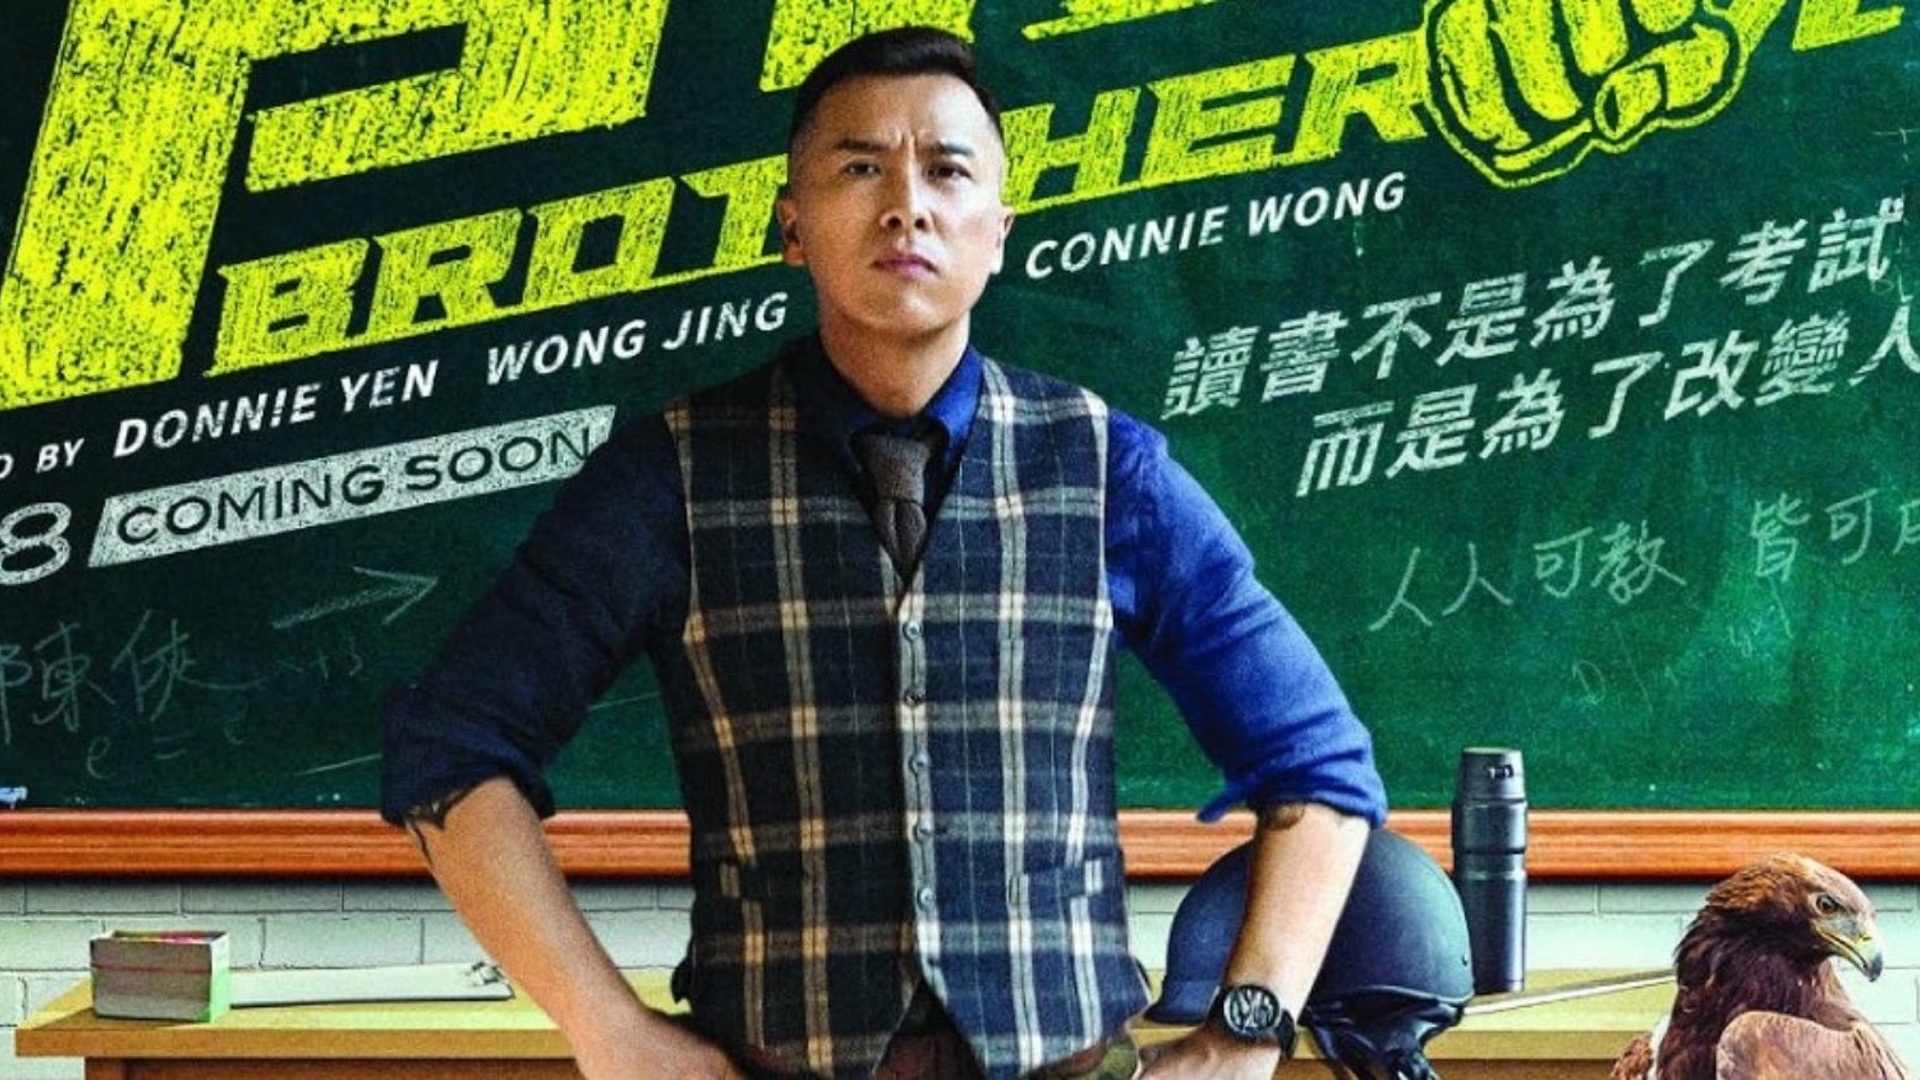 Donnie Yen, Action-packed trailer, Big Brother film, Crazy fun, 1920x1080 Full HD Desktop